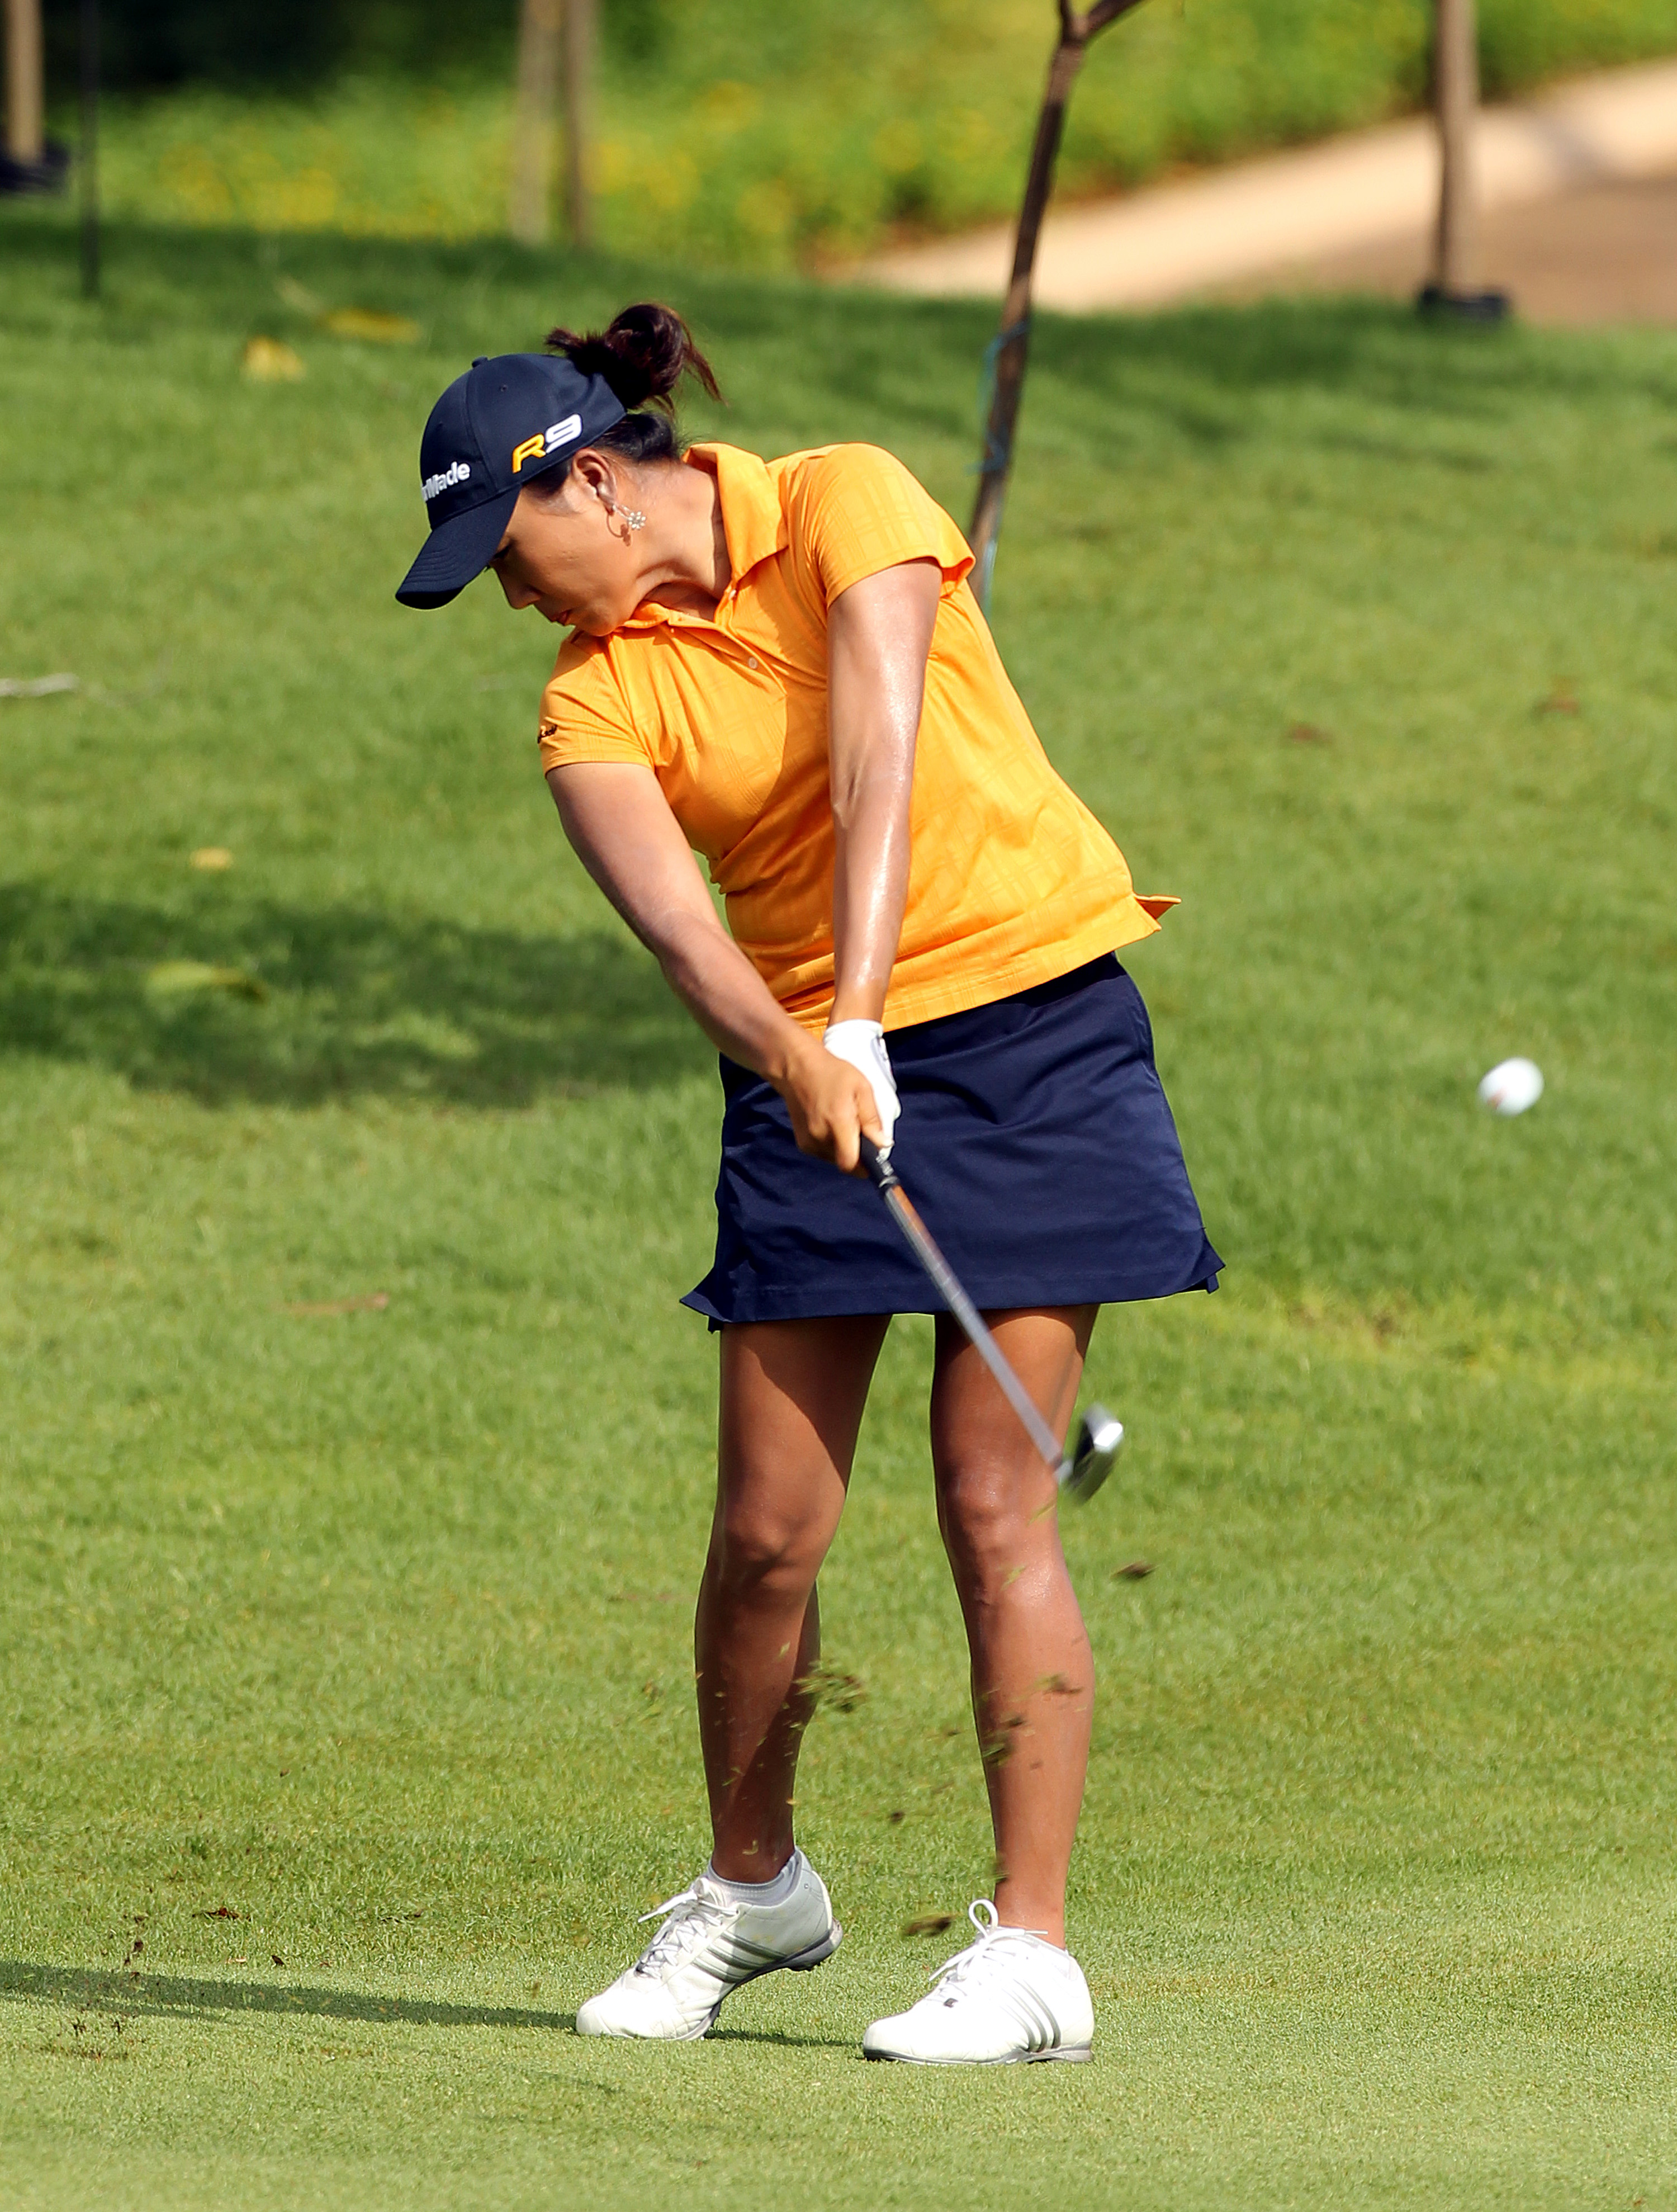 KUALA LUMPUR, MALAYSIA - OCTOBER 24:  Seon Hwa Lee of Korea Repubic hits her 2nd tee shot on the 1st hole during the Final Round of the Sime Darby LPGA on October 24, 2010 at the Kuala Lumpur Golf and Country Club in Kuala Lumpur, Malaysia. (Photo by Stan